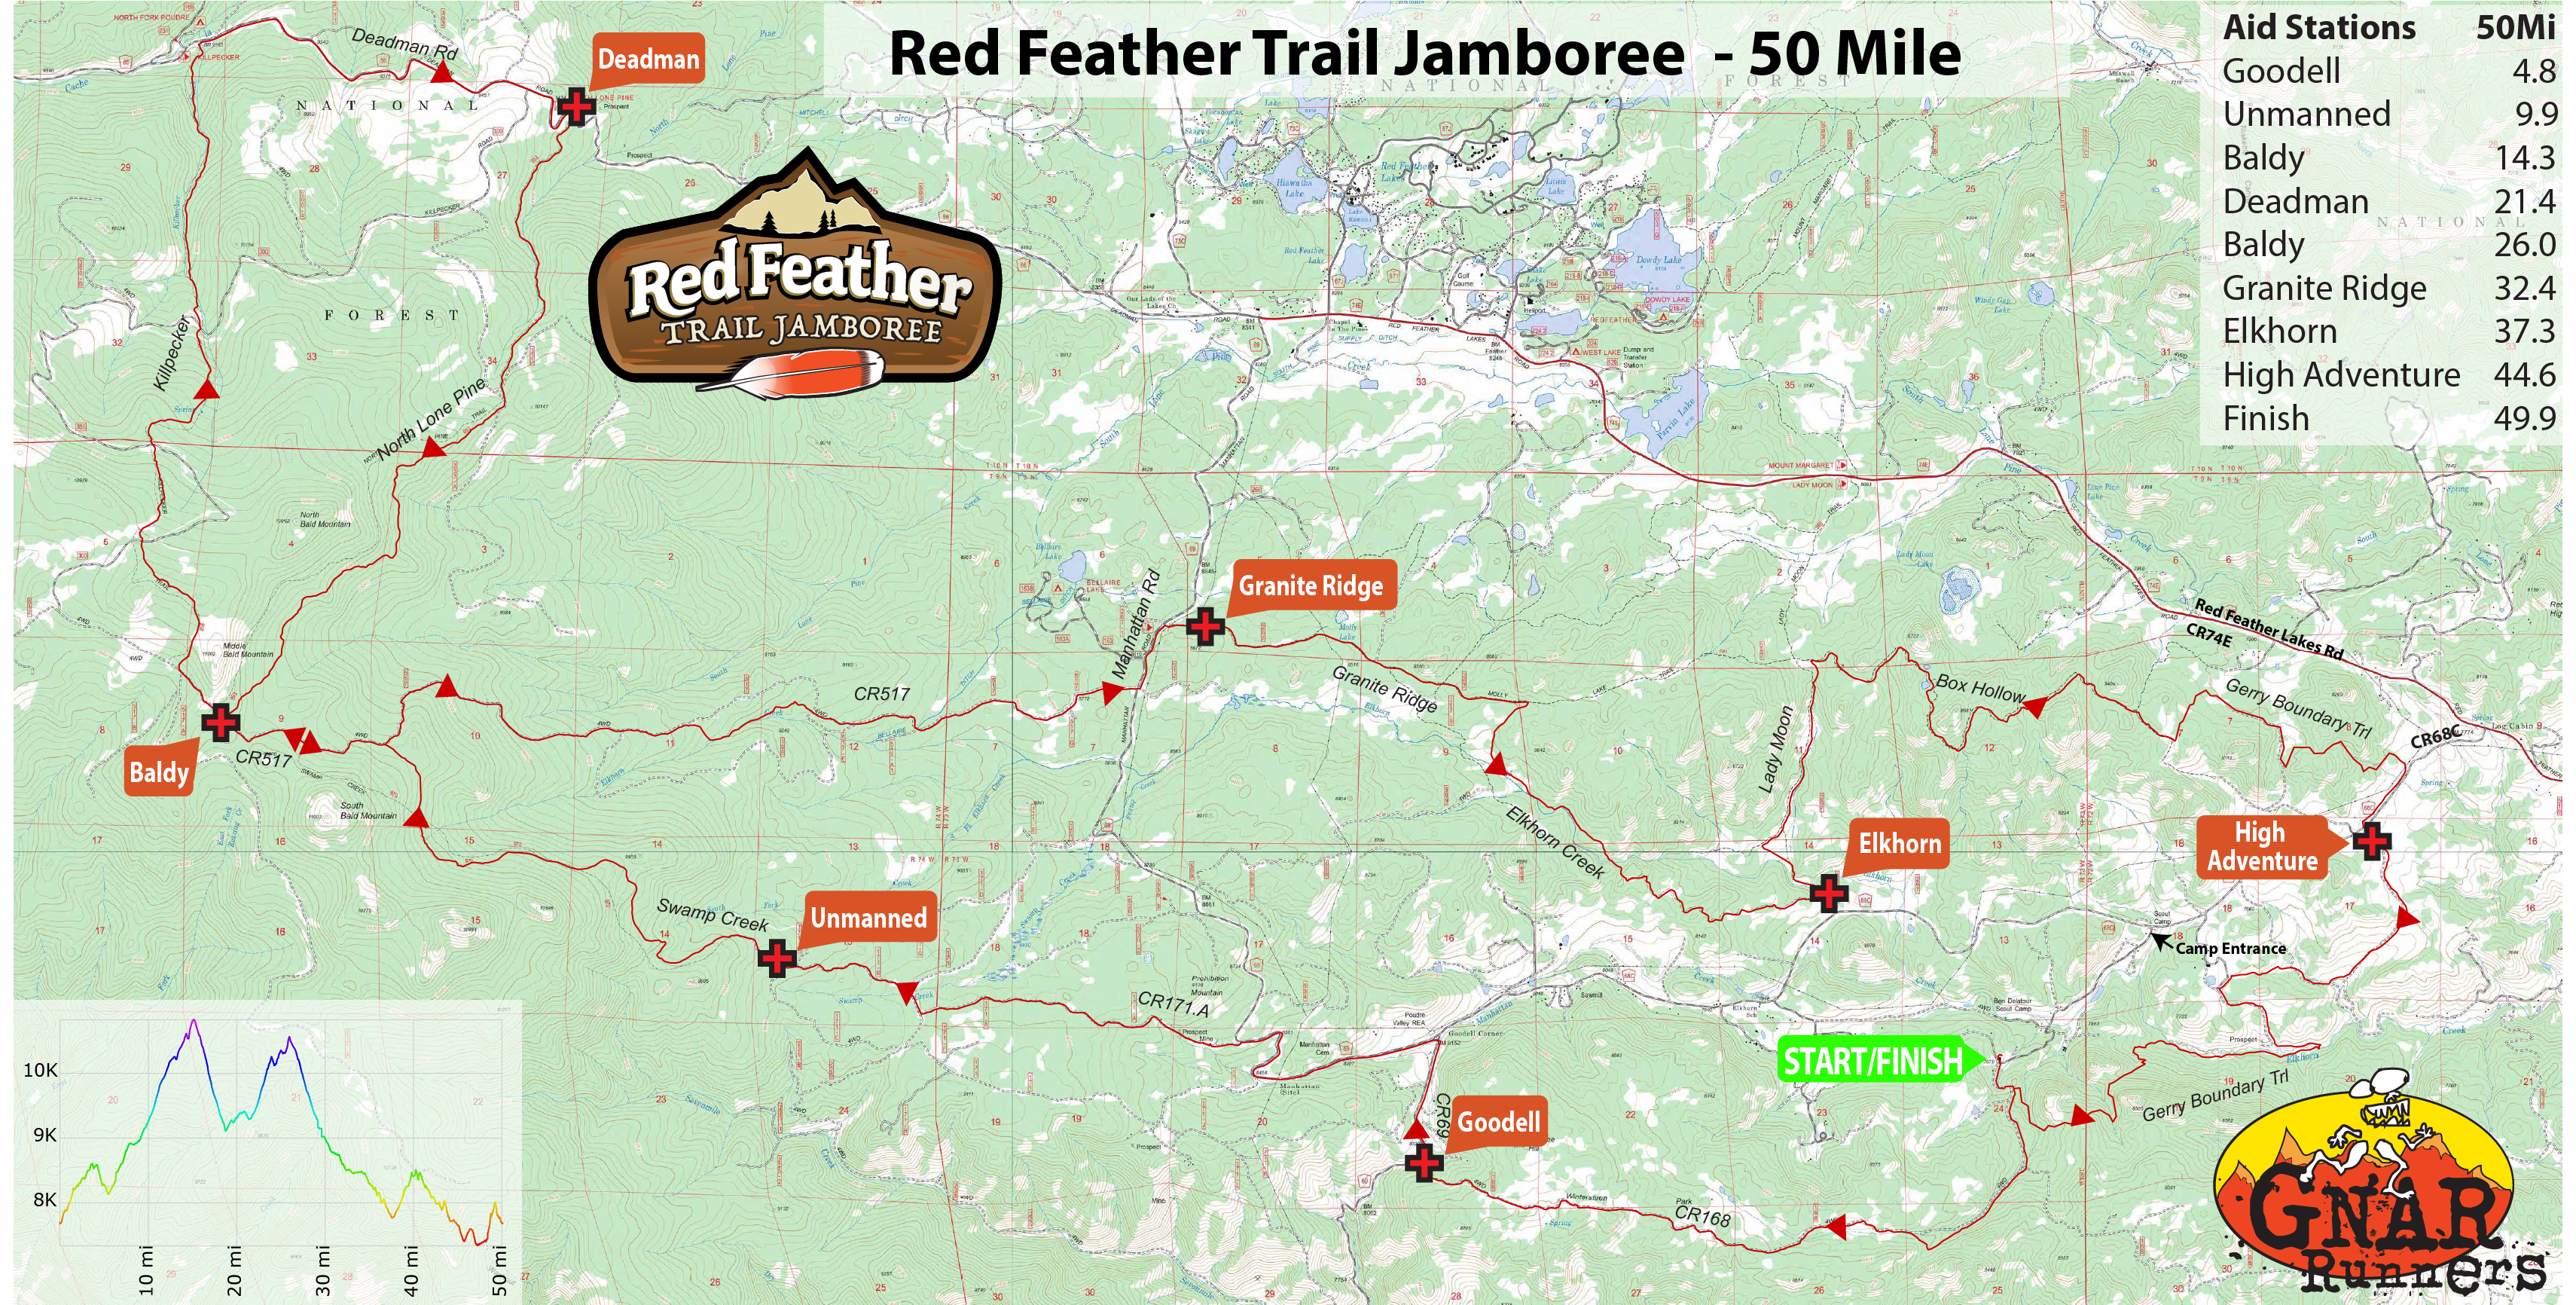 Red Feather Trail Jamboree 50 Mile Map